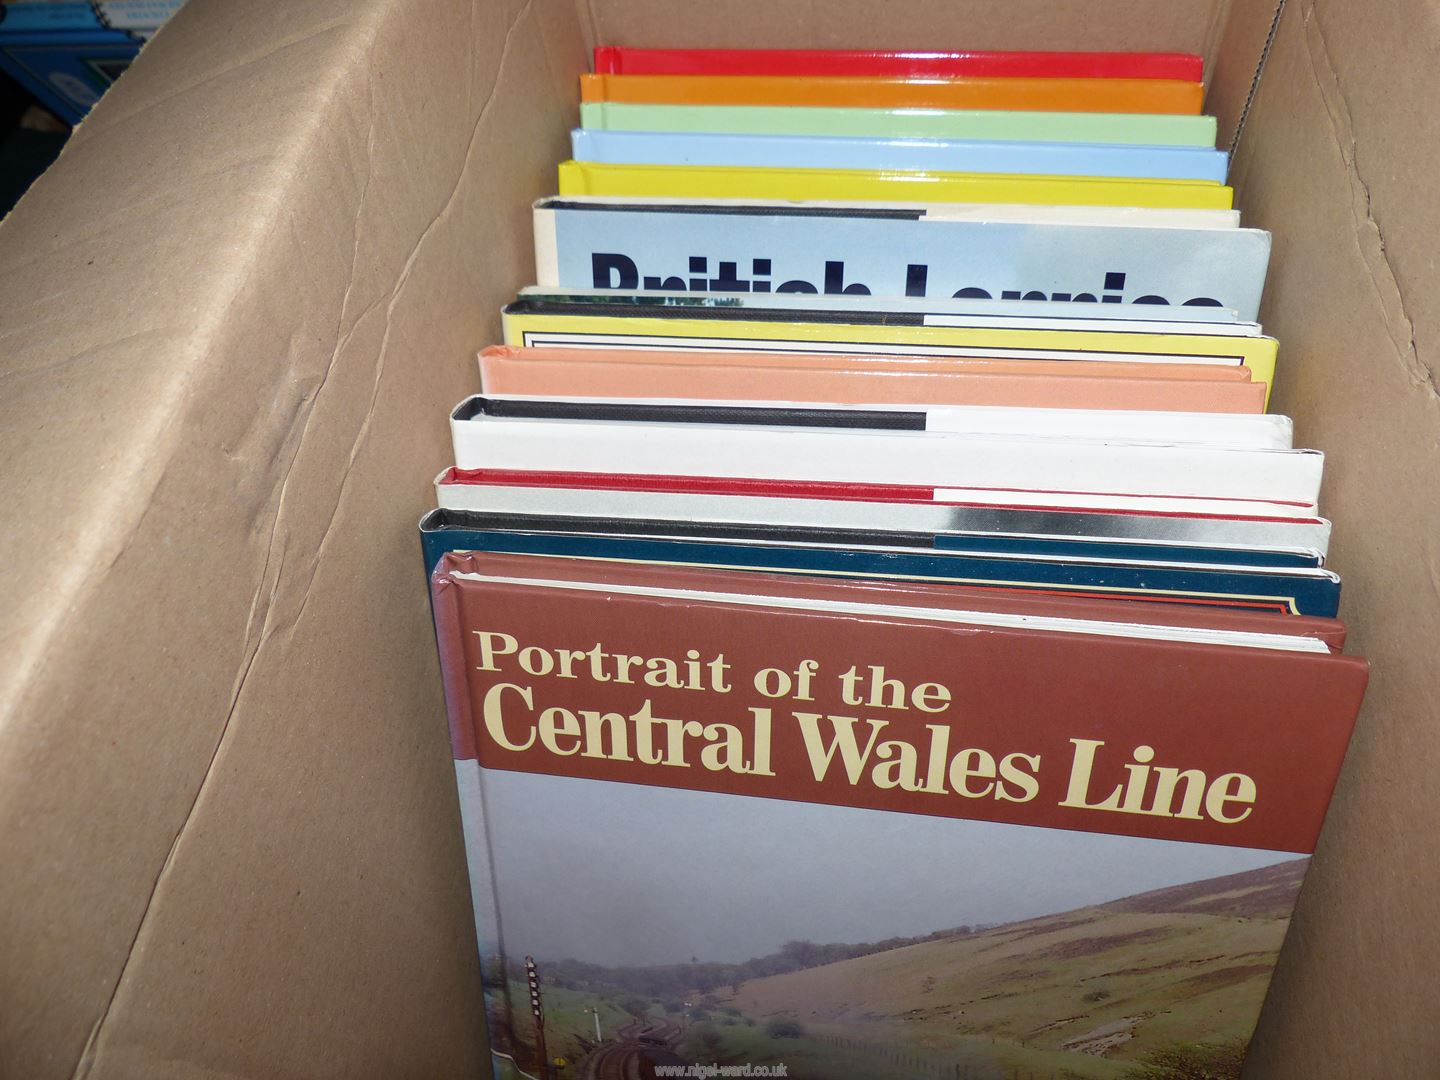 Two boxes of railway books including Country Railway Routes, - Image 3 of 3